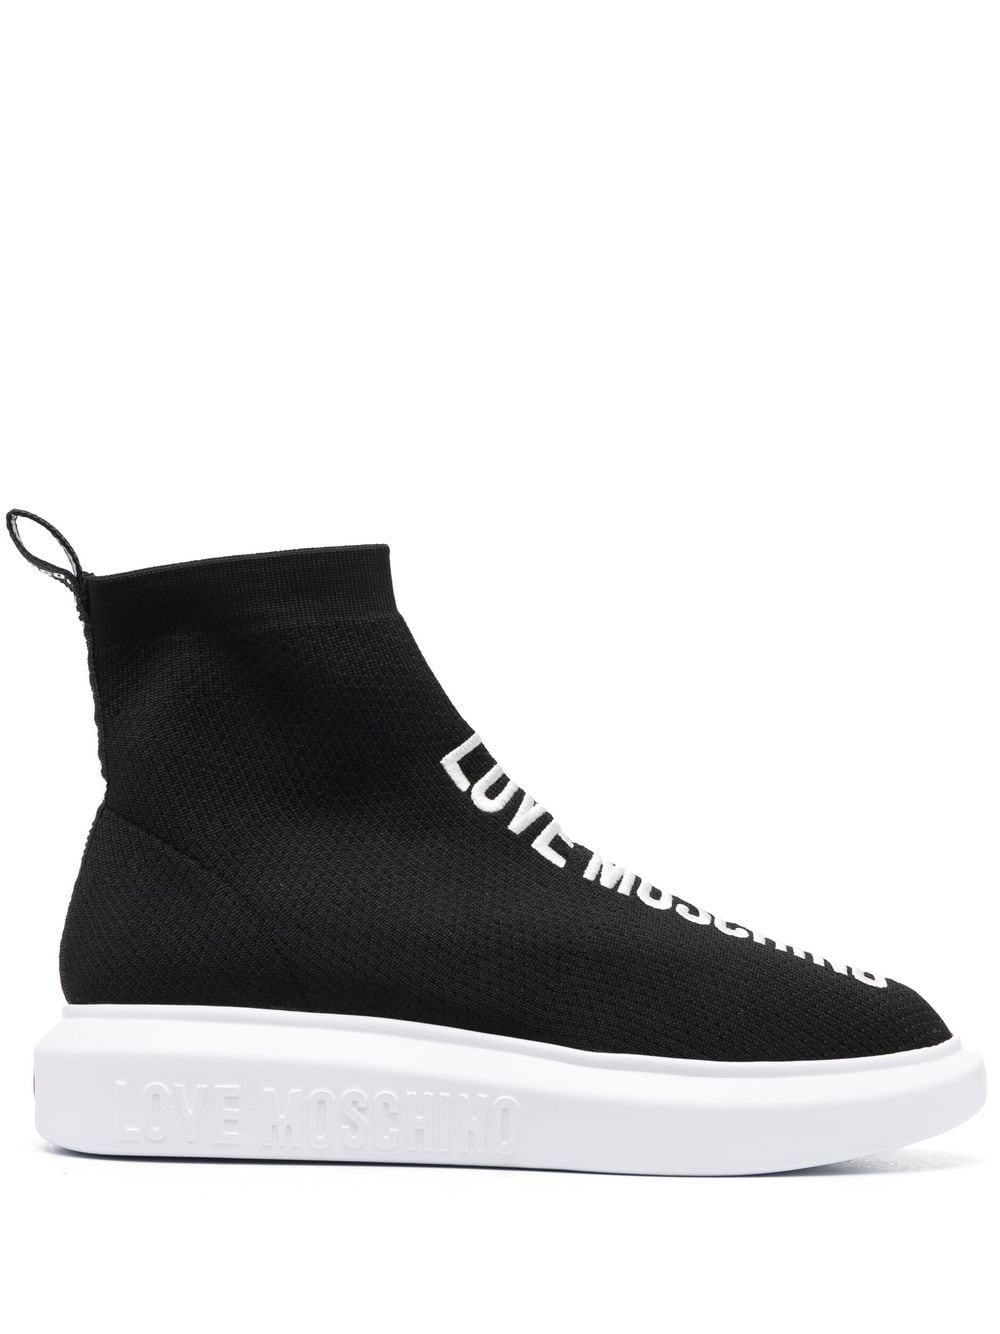 Image 1 of Love Moschino high-top logo-print sneakers